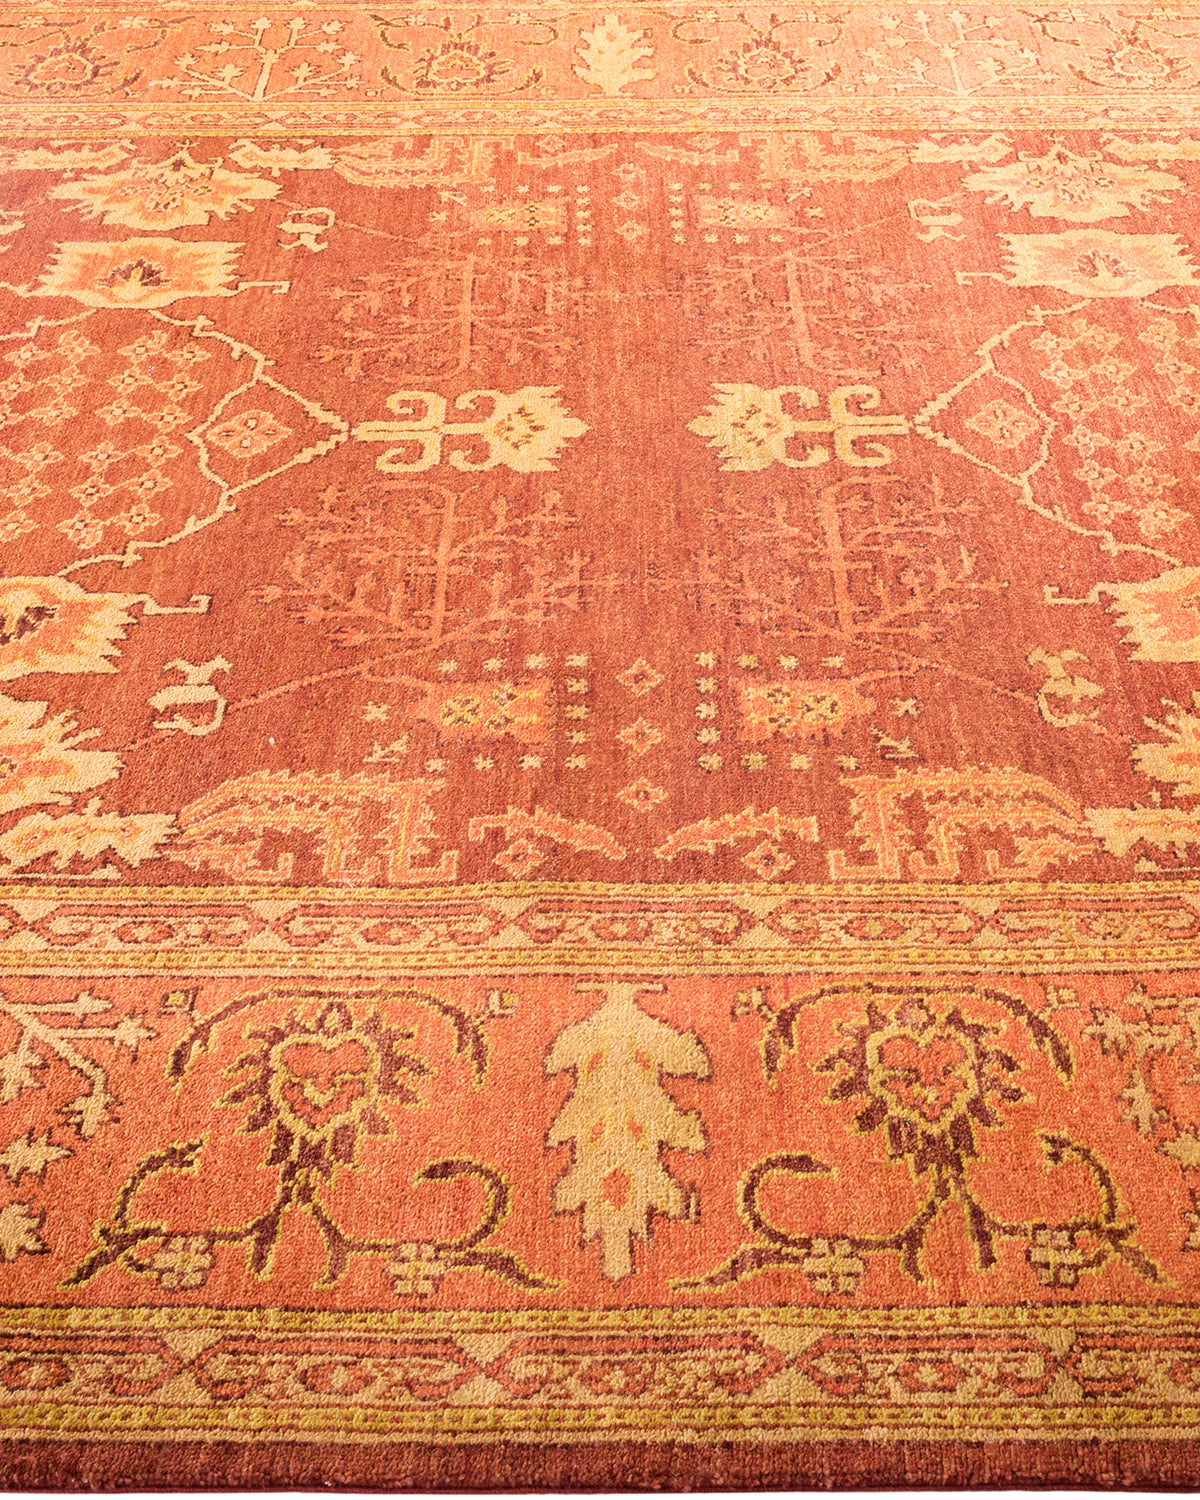 Eclectic, One-of-a-Kind Hand-Knotted Area Rug  - Orange, 6' 3" x 8' 8"